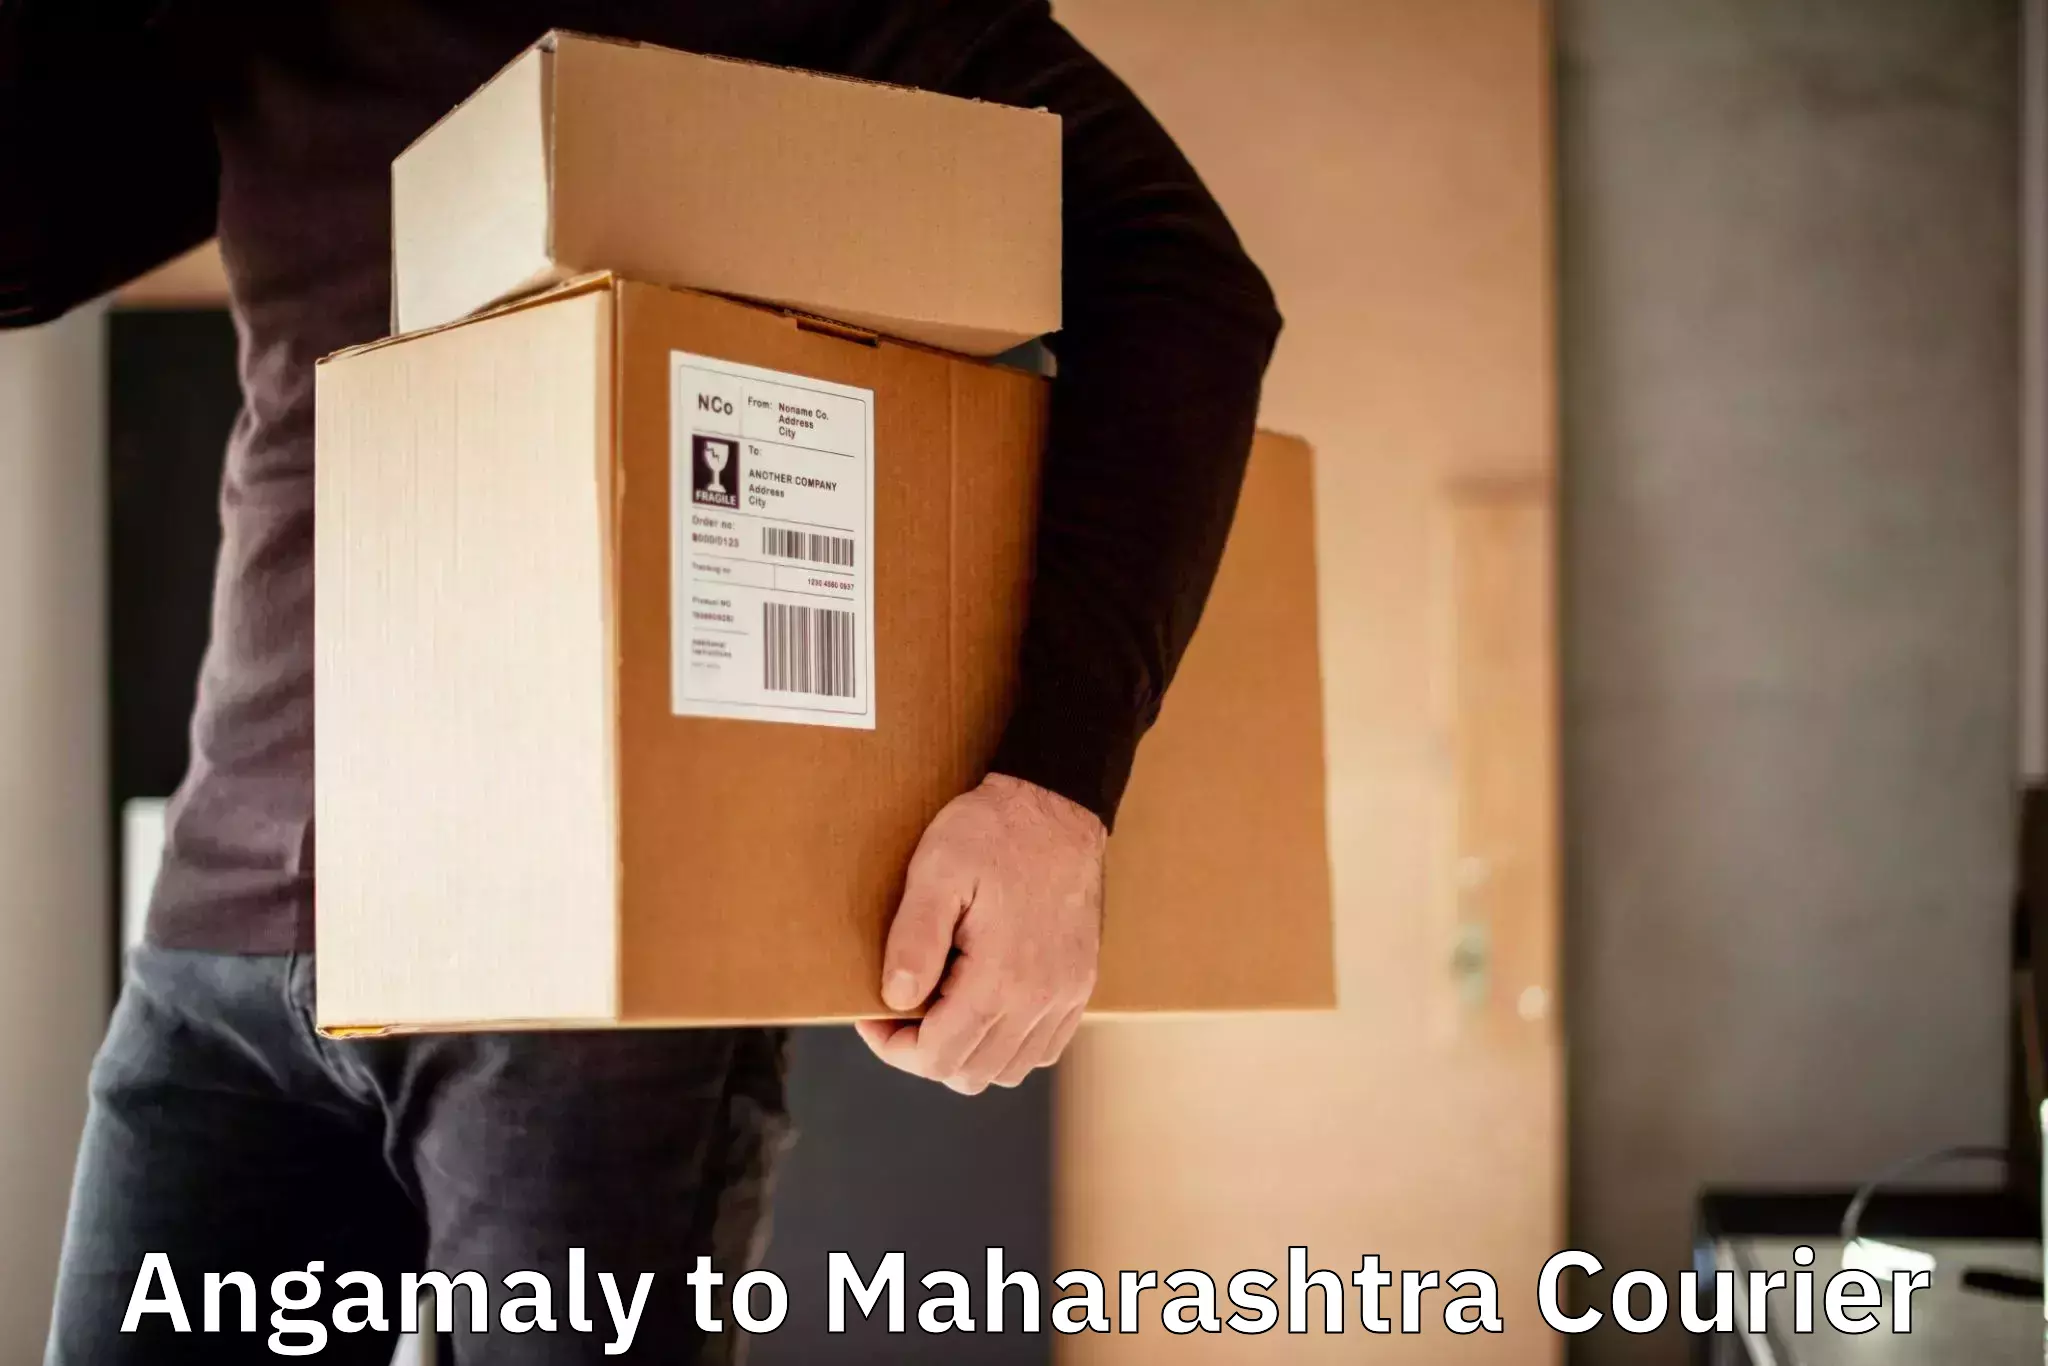 Express delivery capabilities Angamaly to Nashik